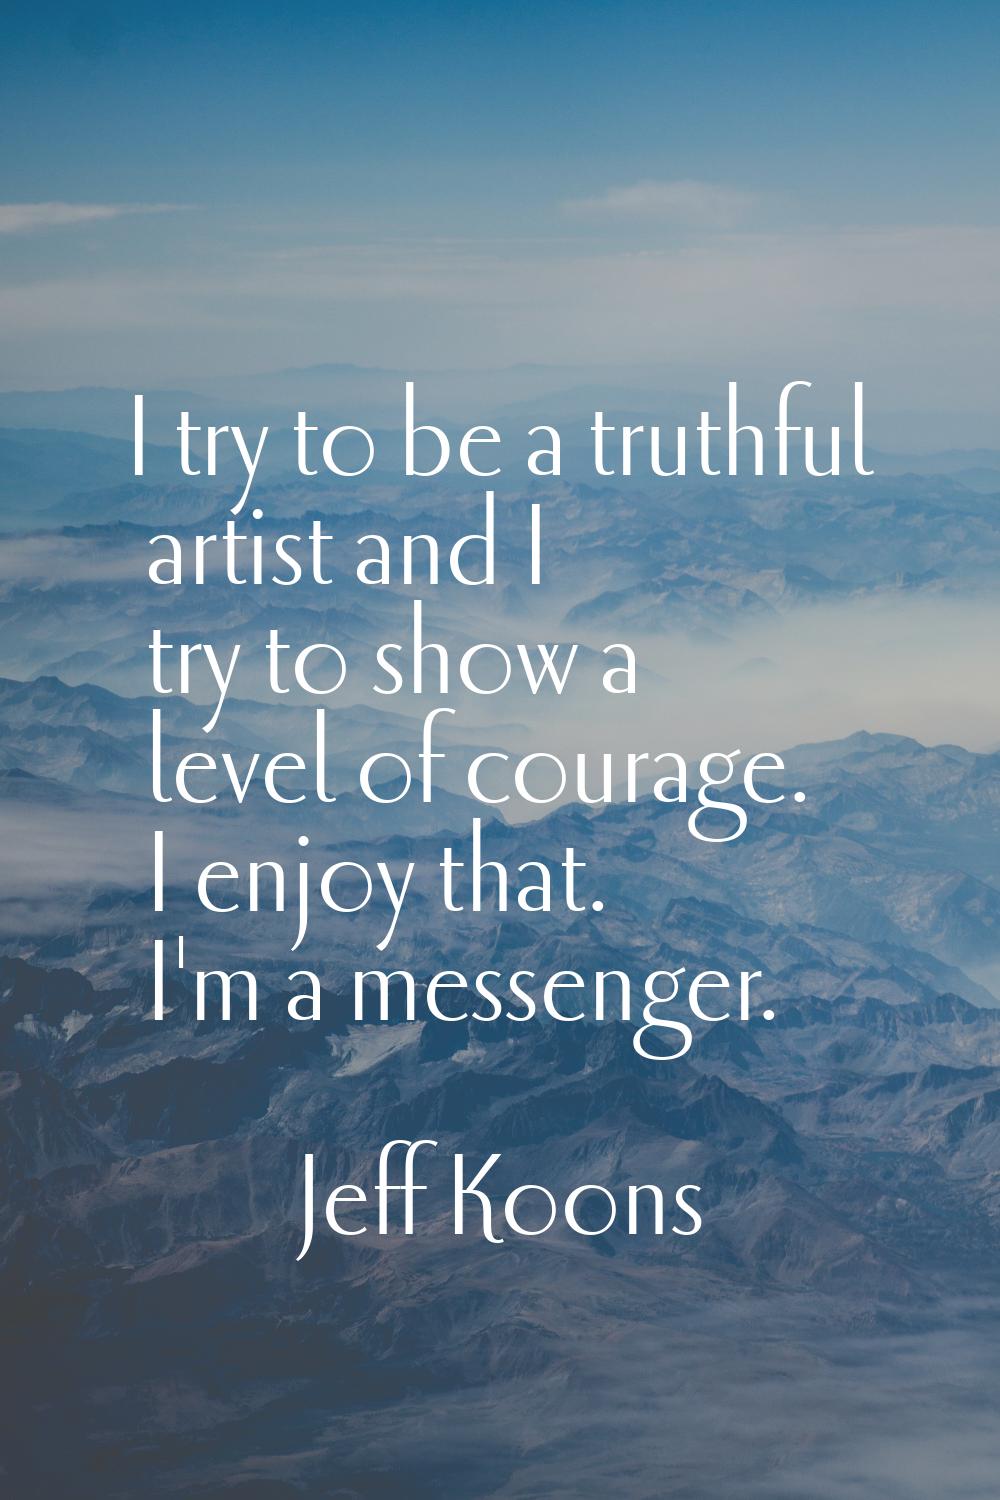 I try to be a truthful artist and I try to show a level of courage. I enjoy that. I'm a messenger.